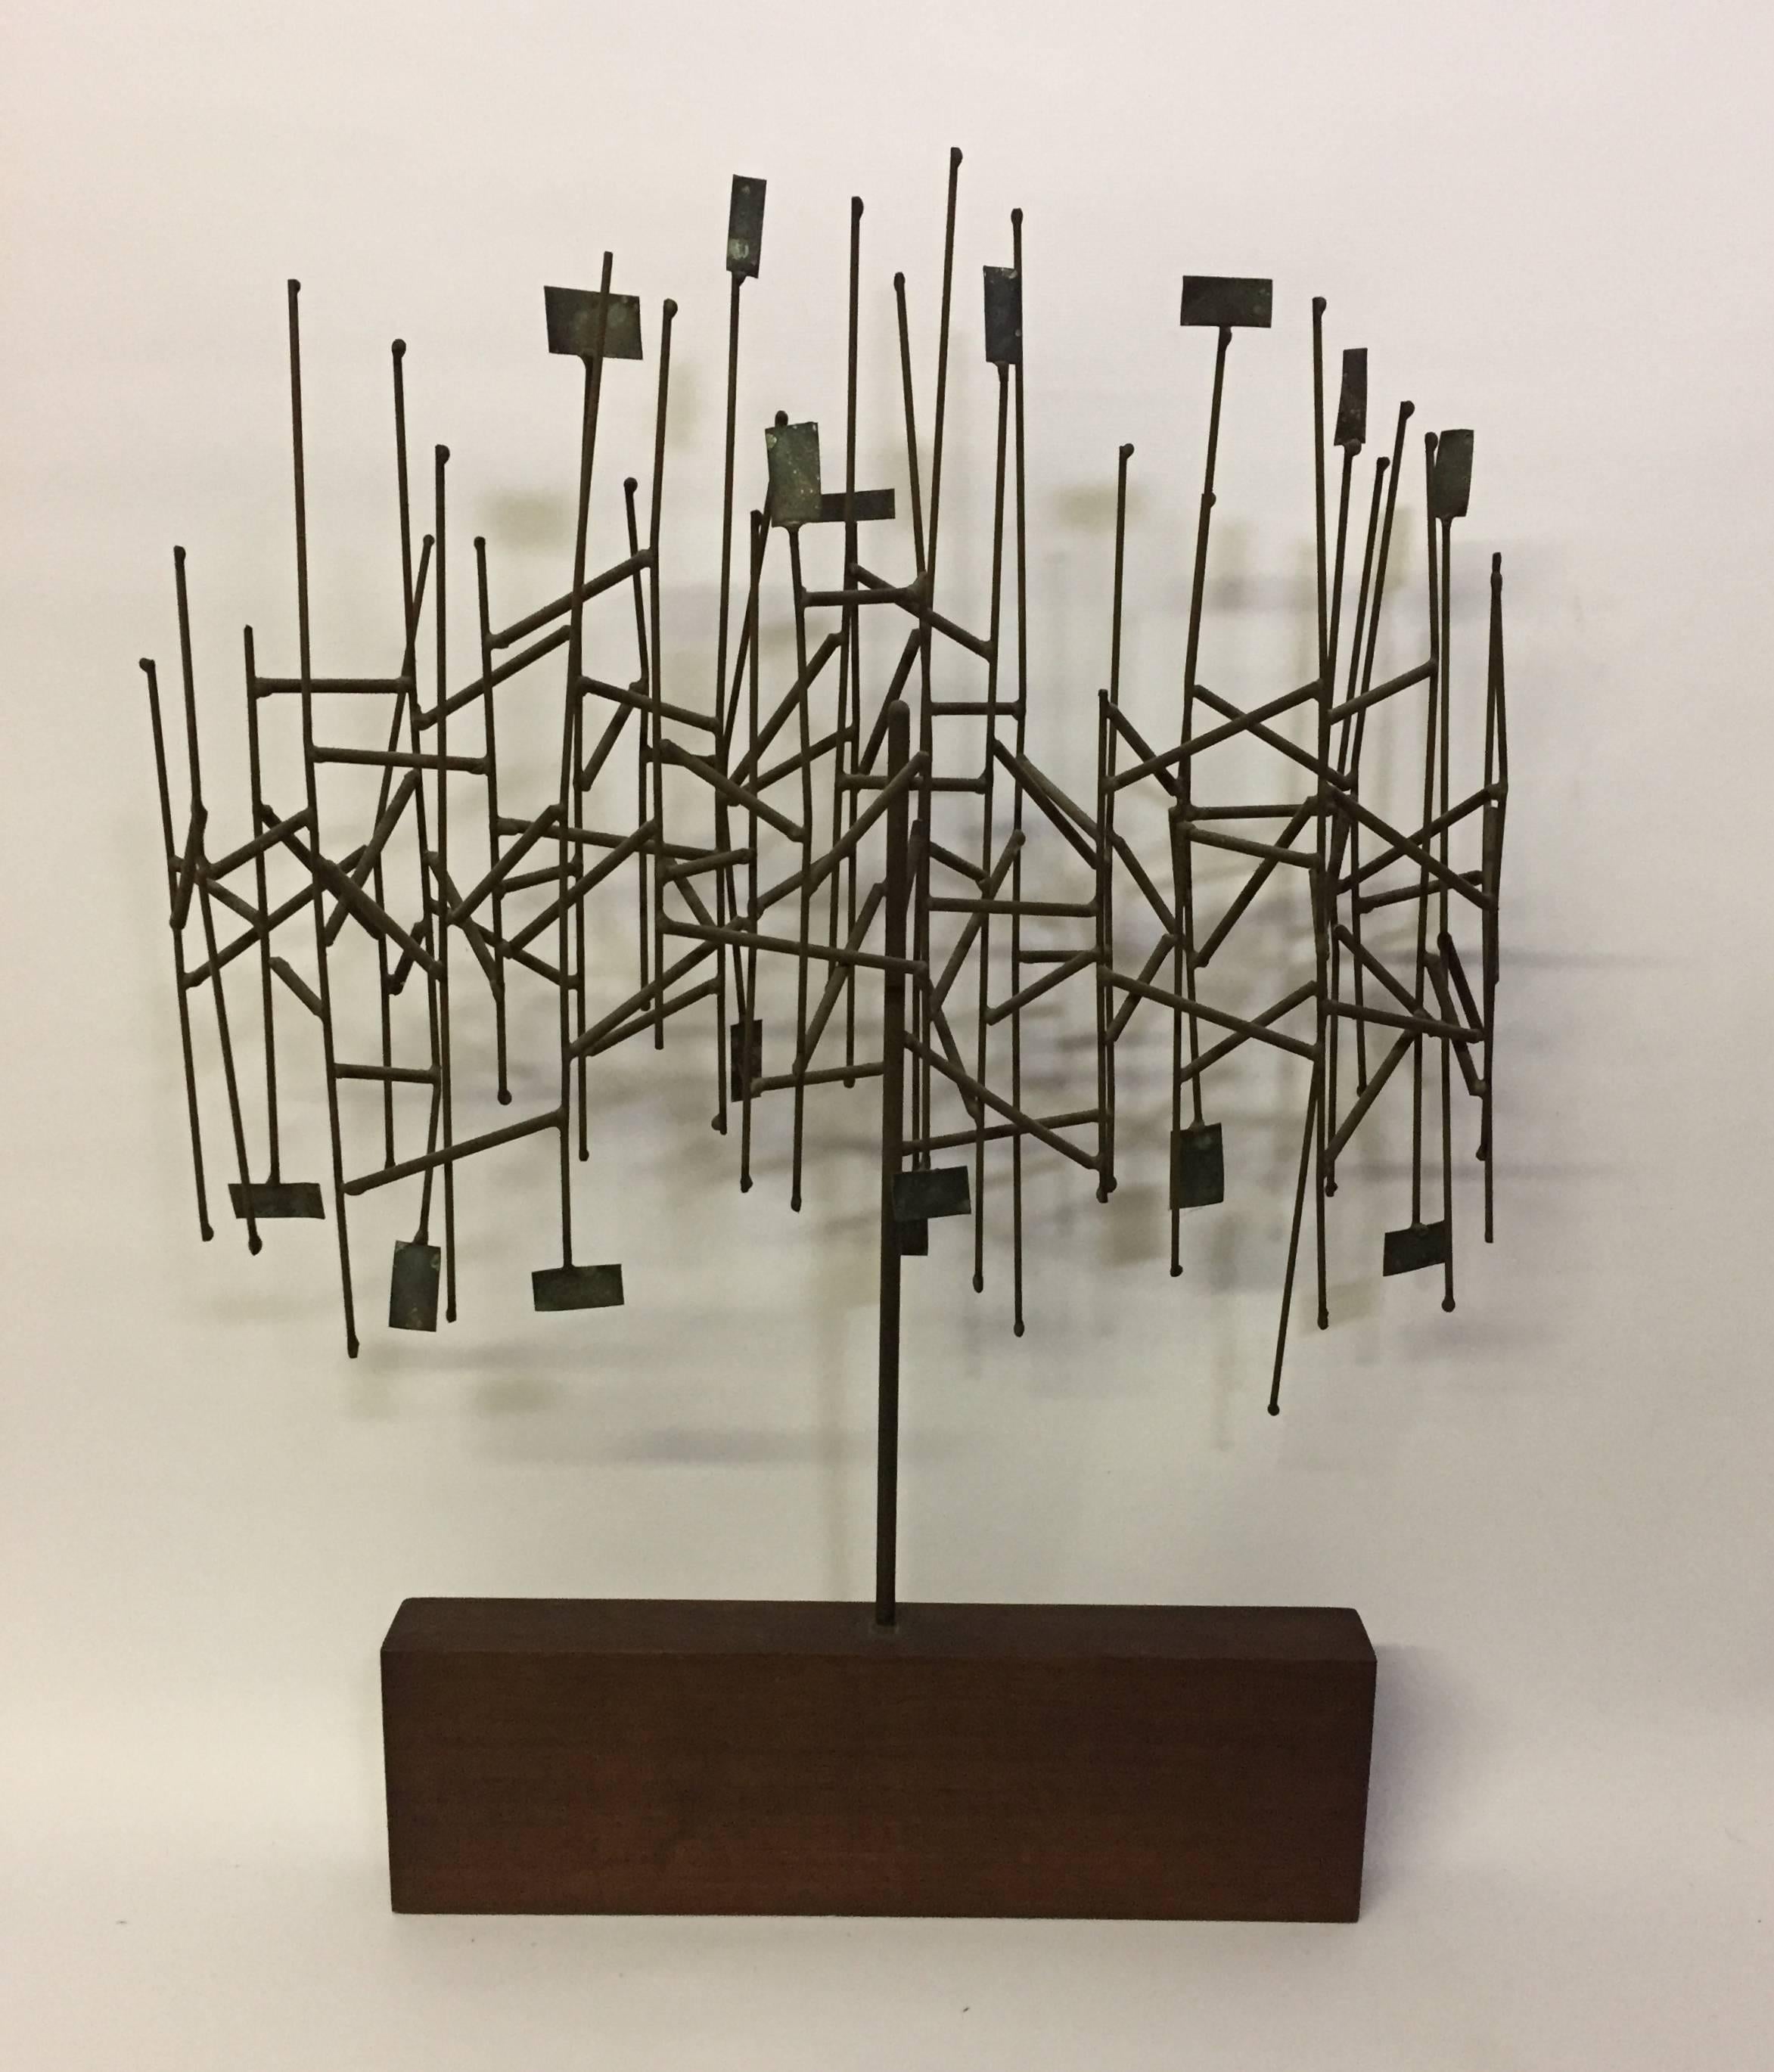 Wonderful mixed metals tree sculpture, circa 1960. Mounted on a walnut wood base. Reminiscent of Harry Bertoia's sculpture. The sculpture has been attributed to an Italian artist named Brazza who worked predominantly in the USA in the 1960s and